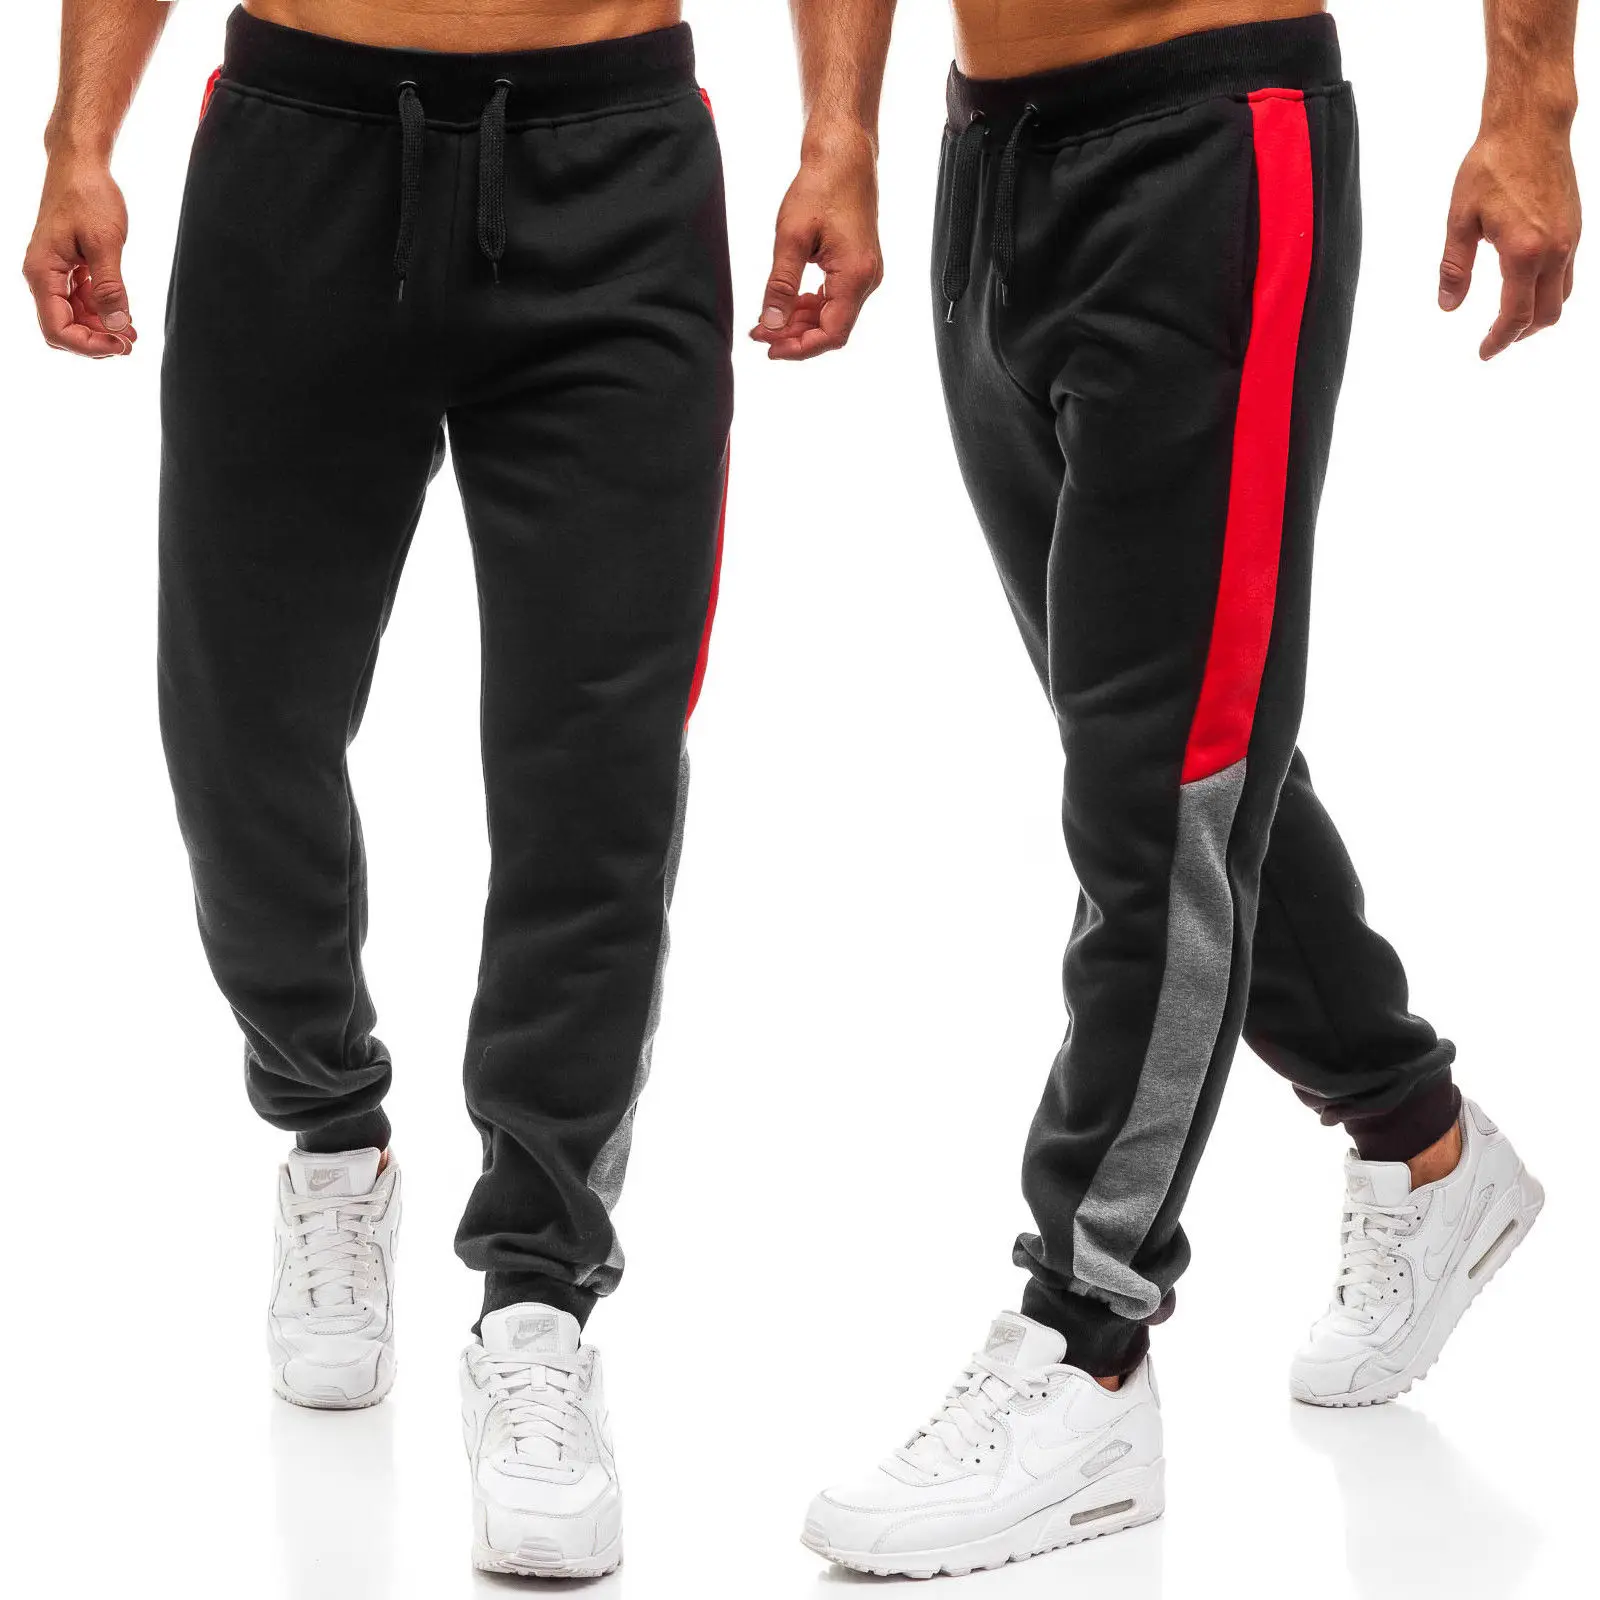 

Males Casual Skinny Pants Gyms Fitness Bodybuilding Jogger Sweatpants Daily Workout Track Pants Male Fashion Trousers D30